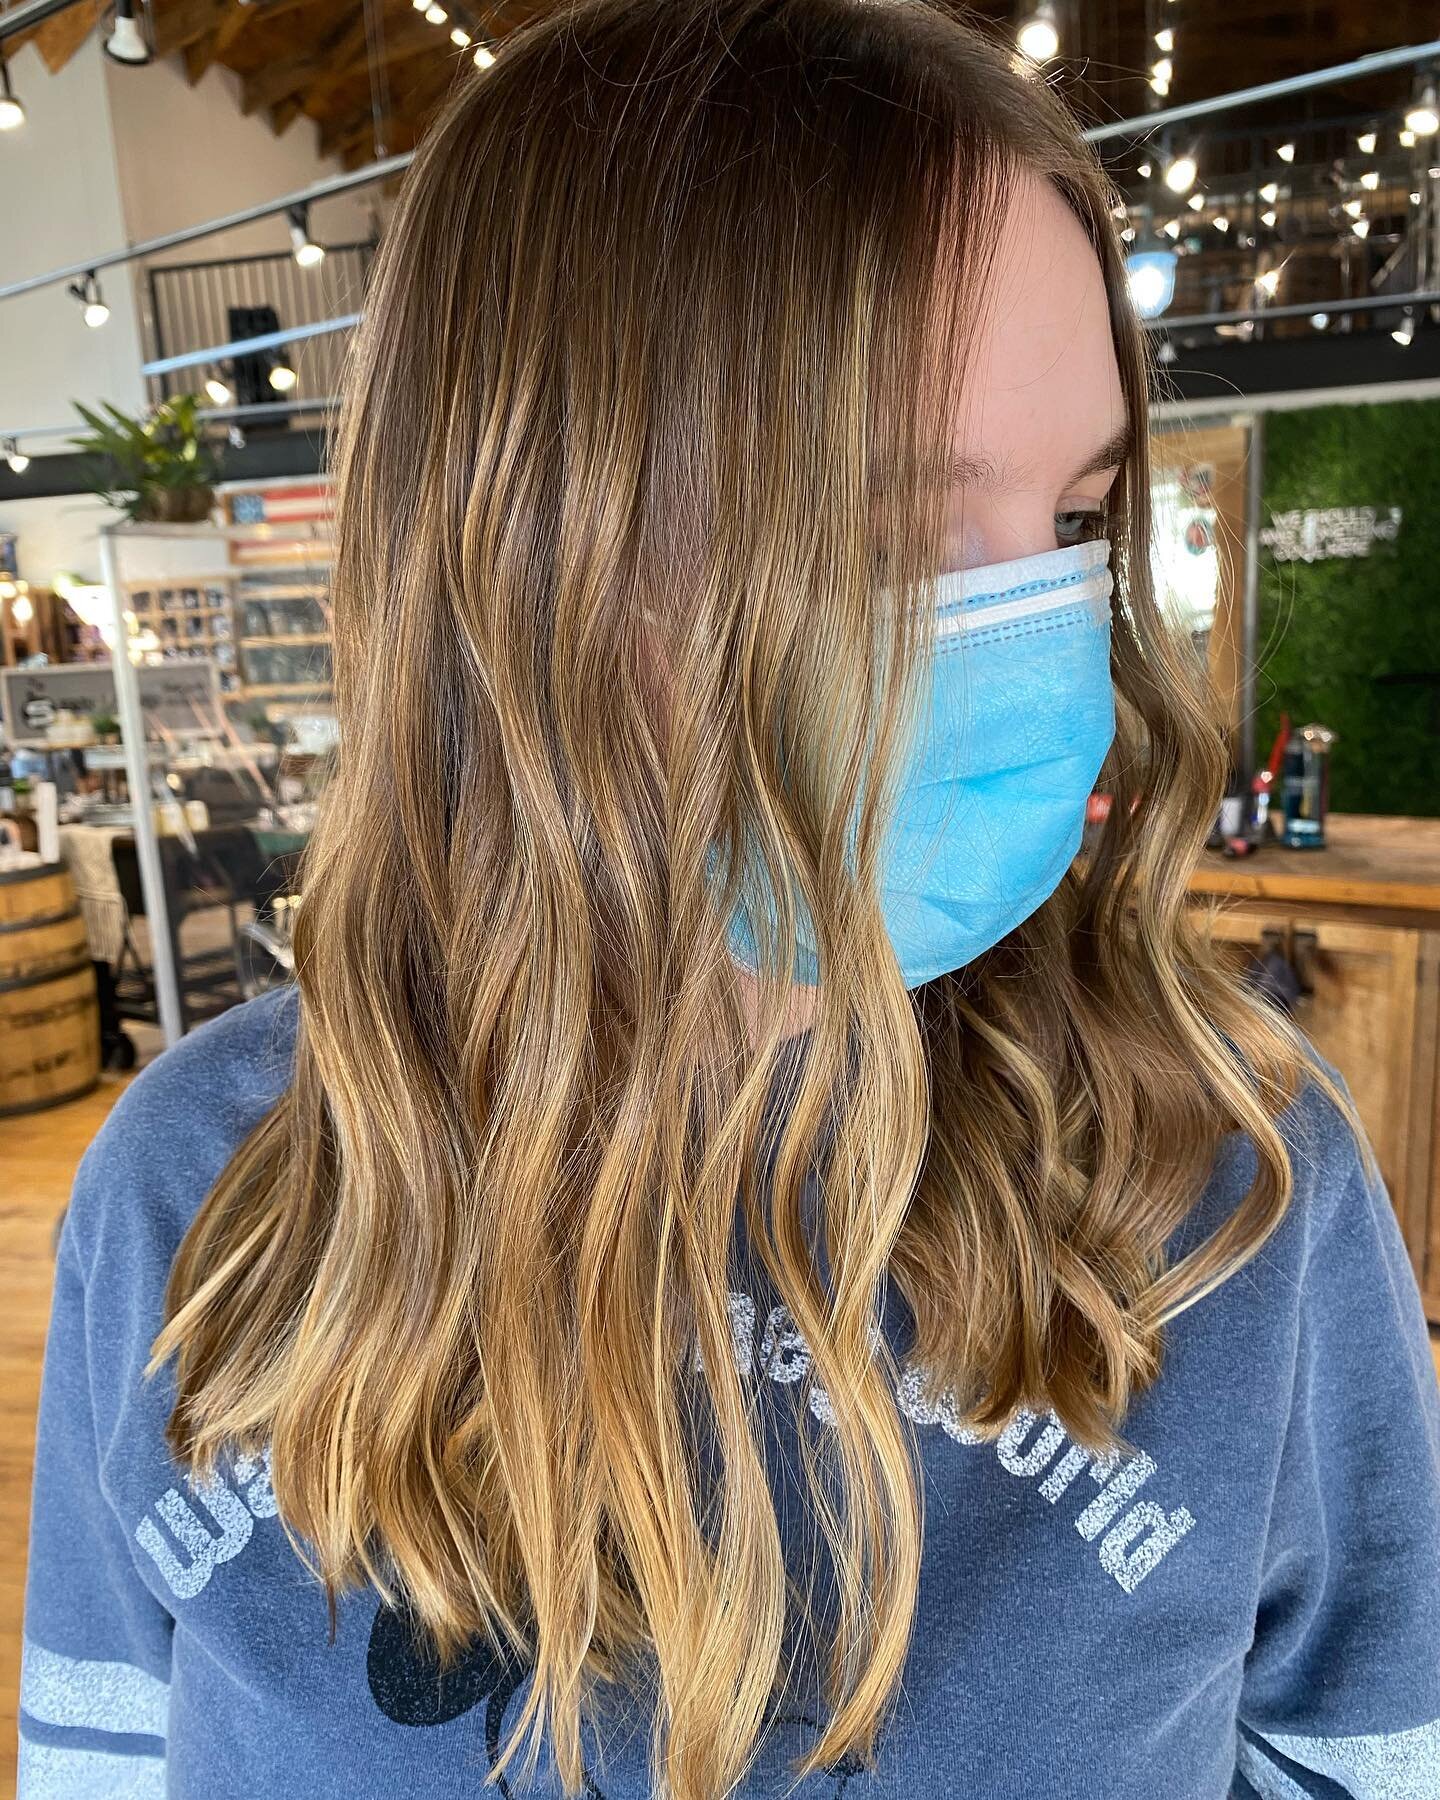 Low maintenance color for the win! This custom balayage service allows you to go 3+ months before coming back! ✨🙌🏽